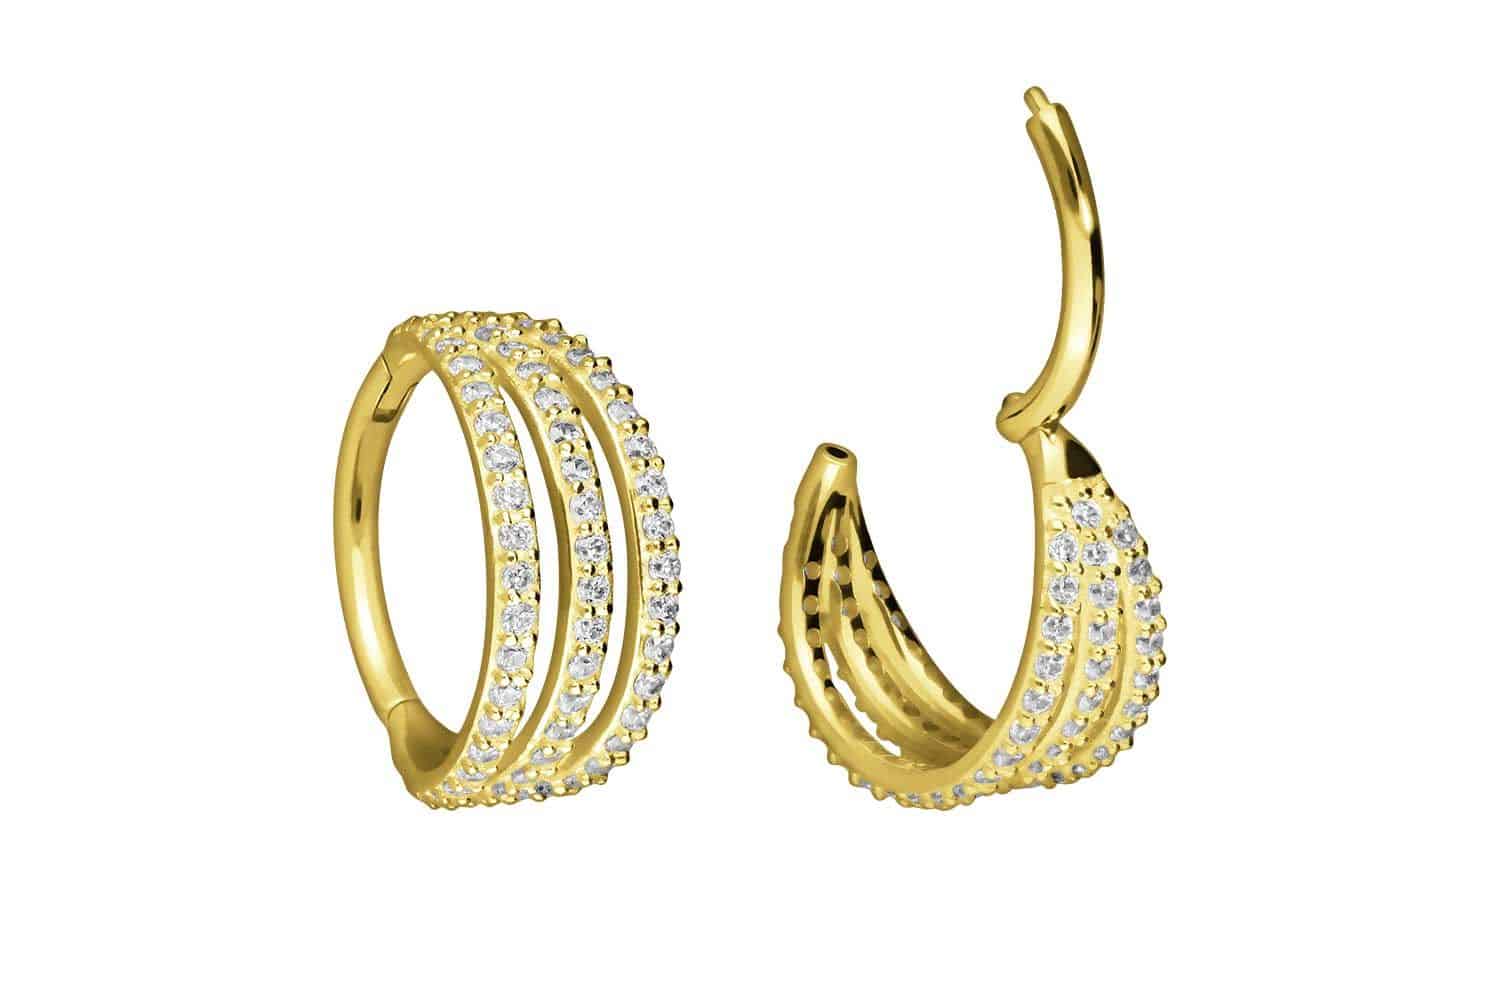 18 carat gold segment ring clicker 3 RINGS + SETTED CRYSTALS